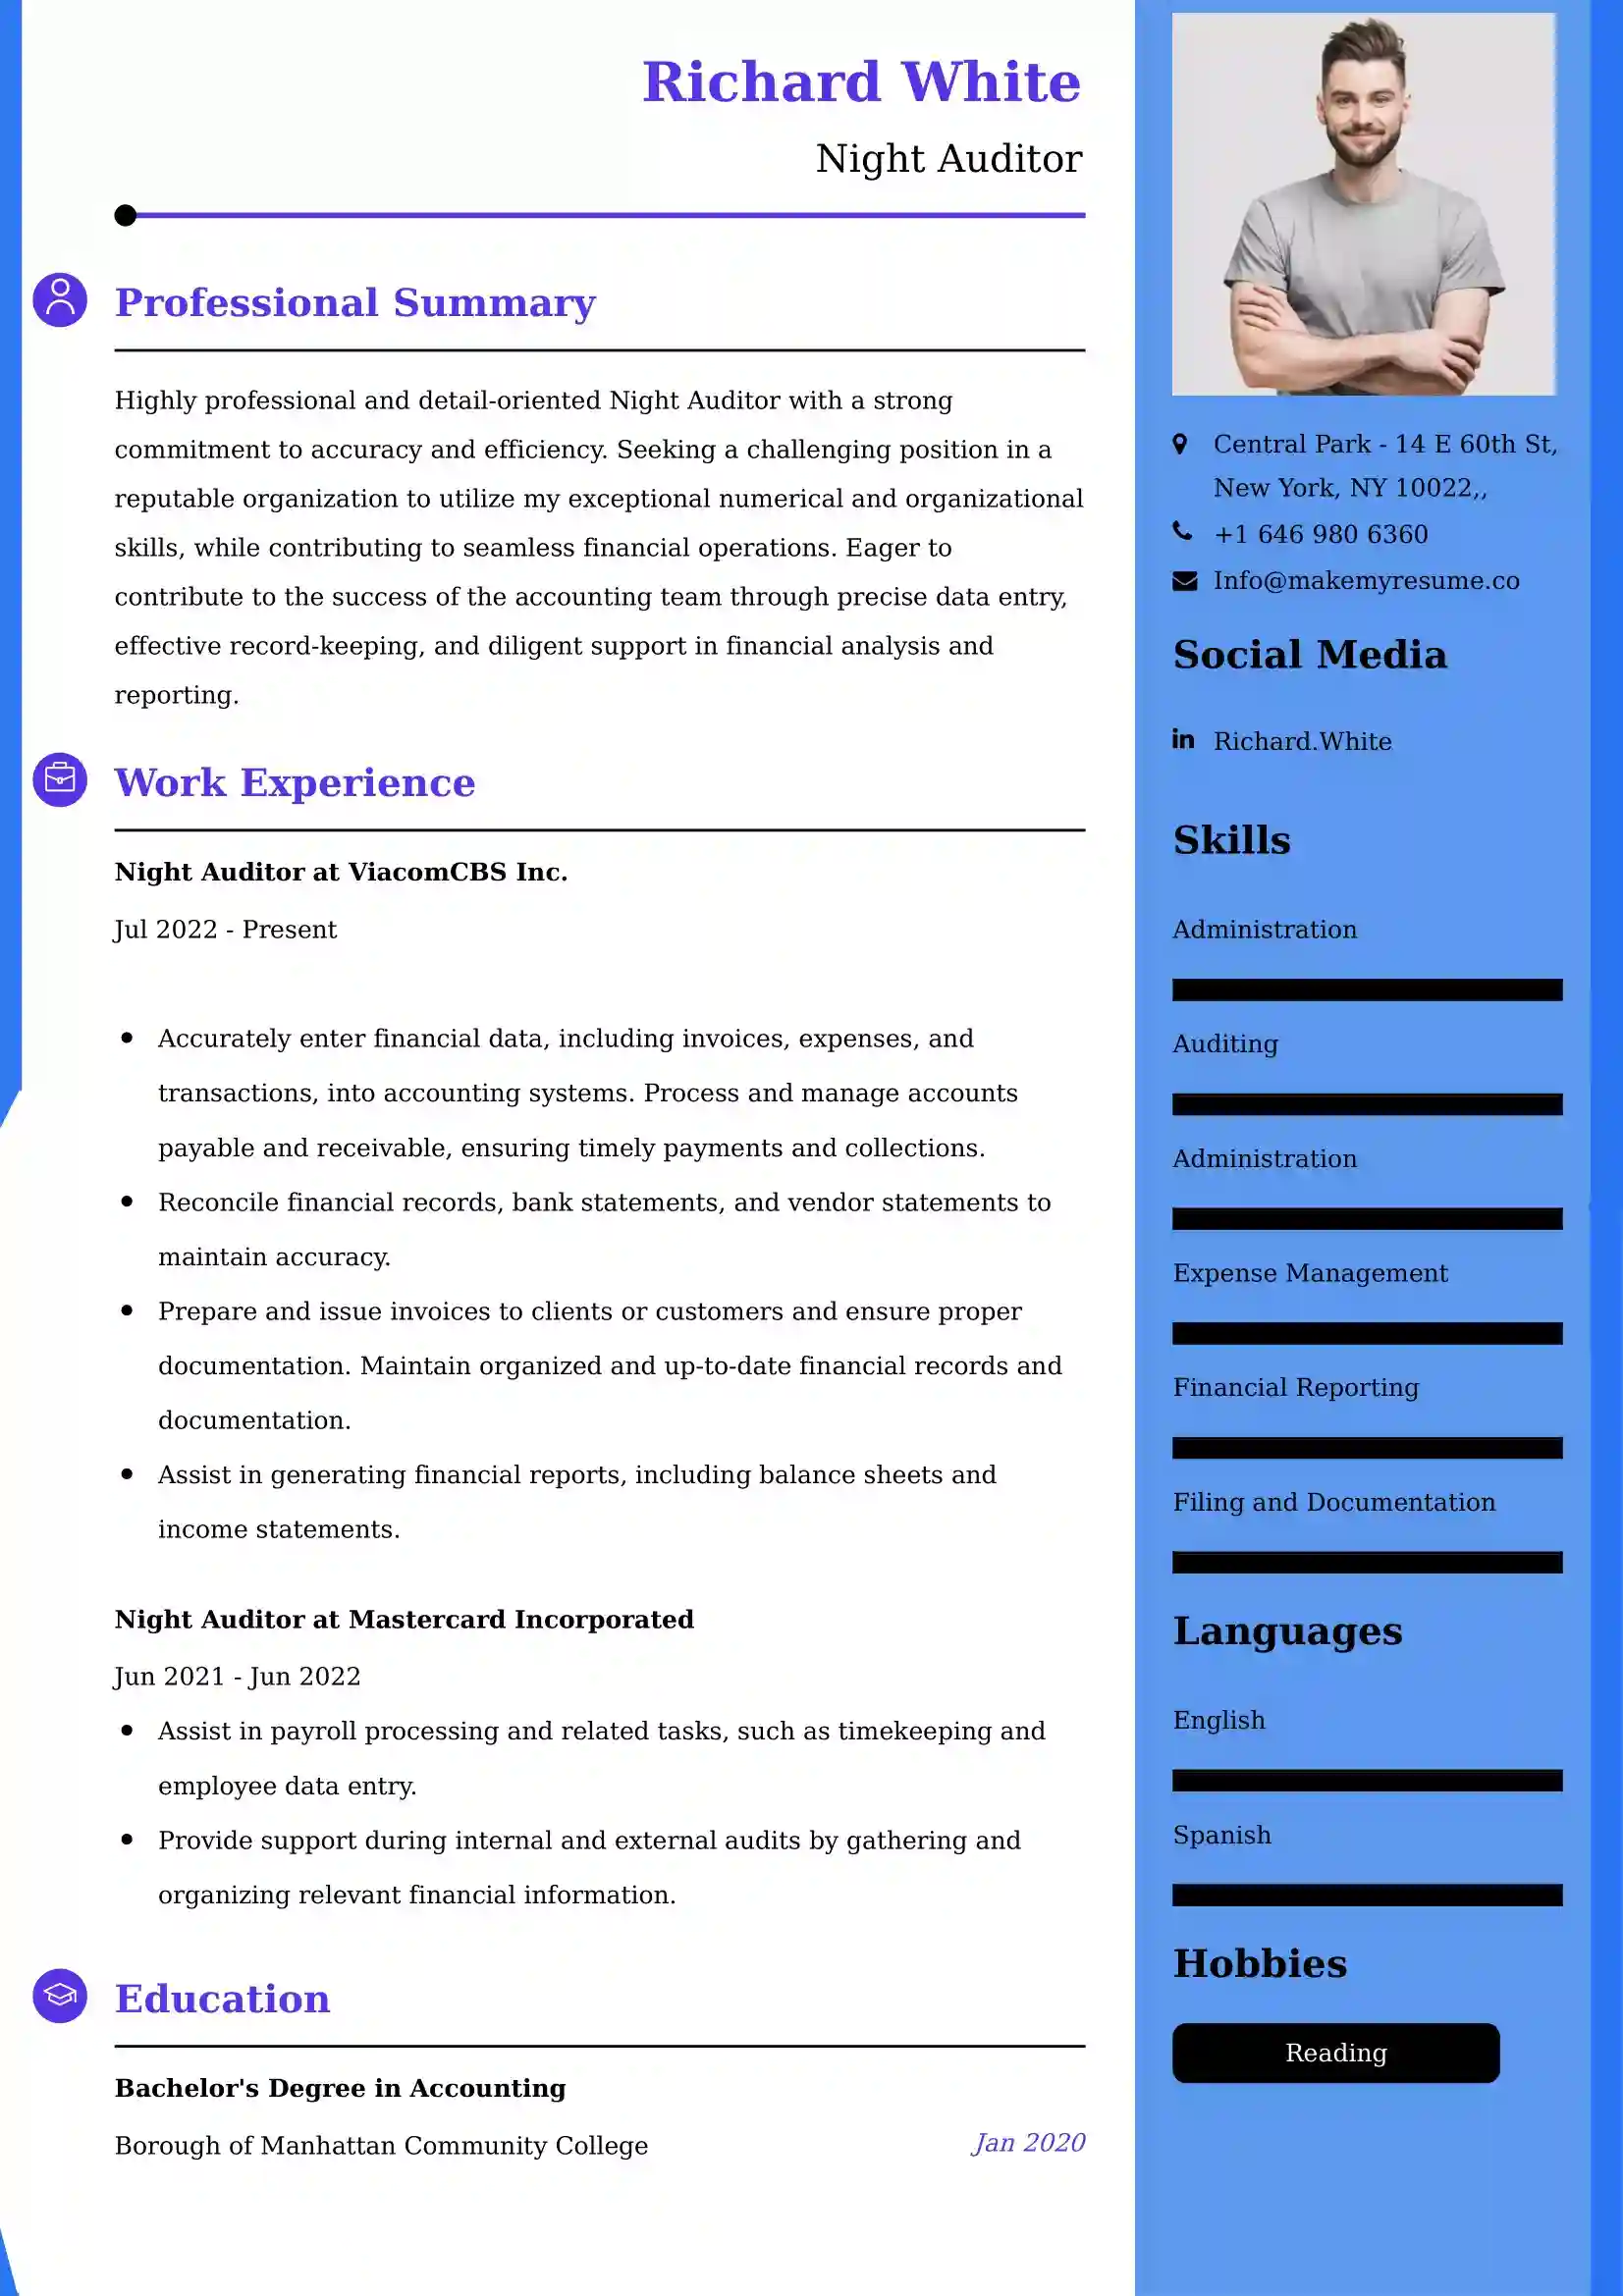 Night Auditor Resume Examples - Brazilian Format, Latest Template